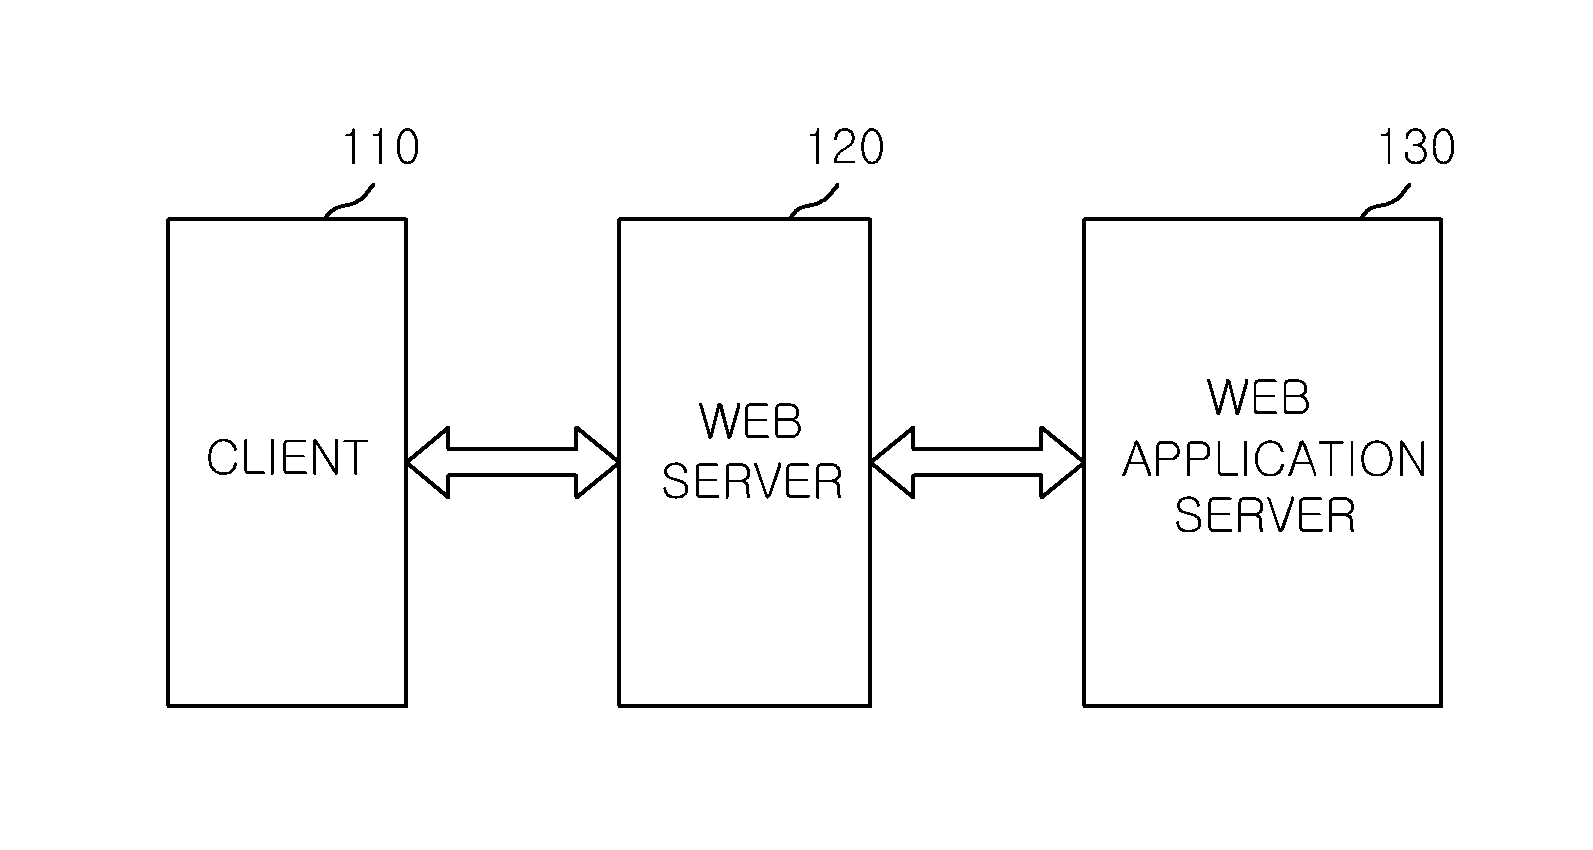 Method and apparatus for managing connection using dummy HTTP